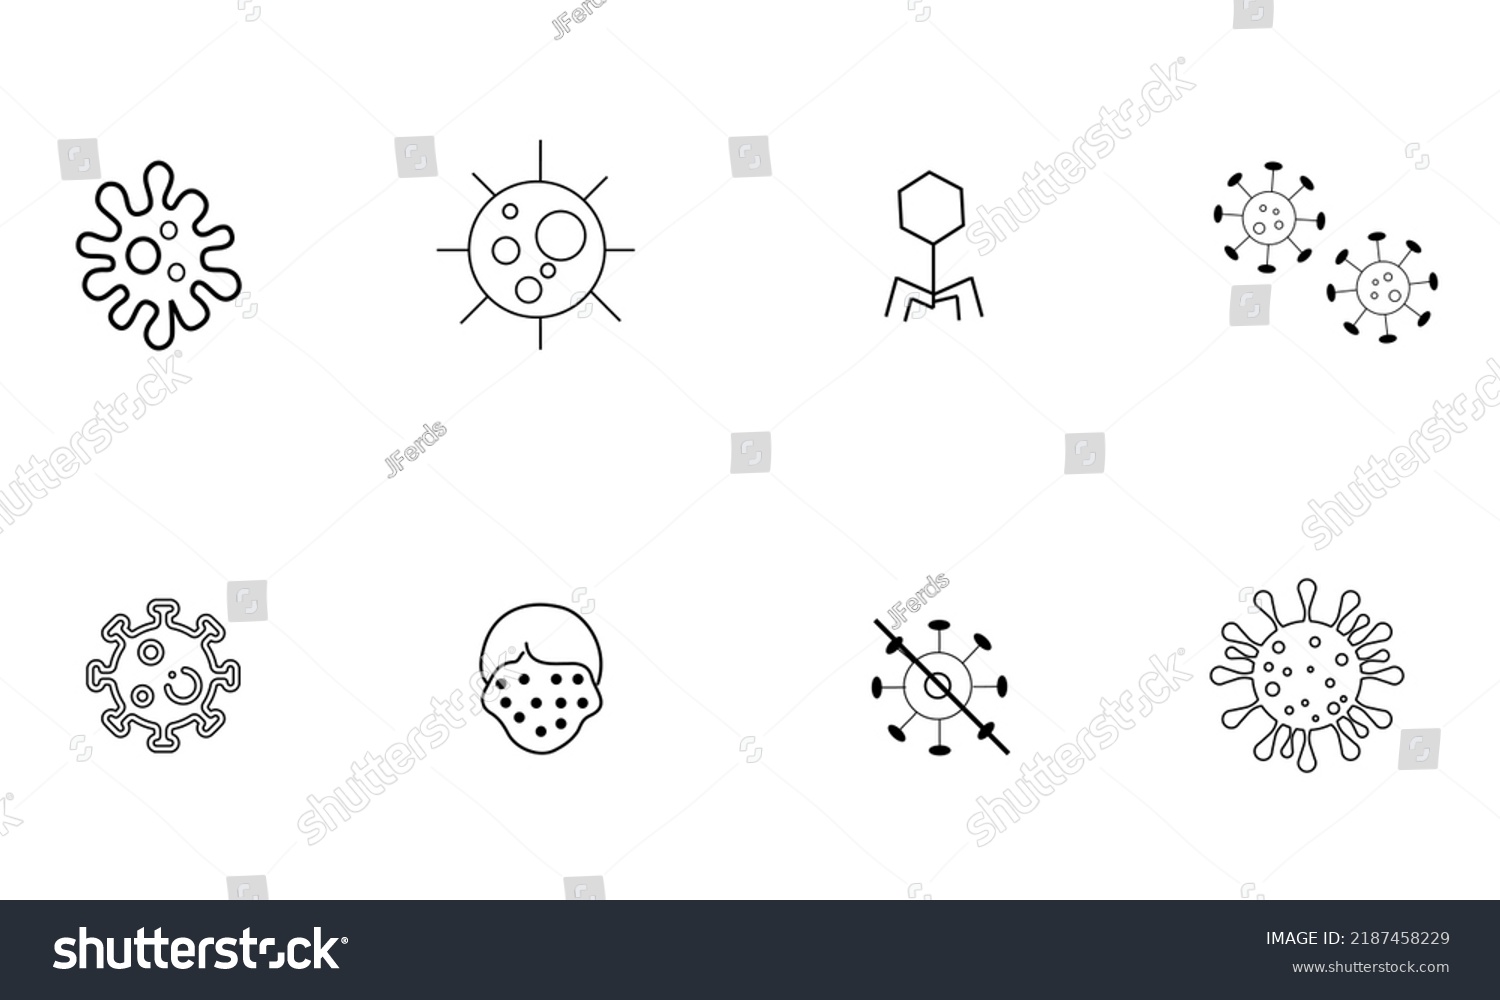 SVG of Covid virus icon png, svg, vector. Virus icon pack, different styles of corona virus in eps format, fully editable svg